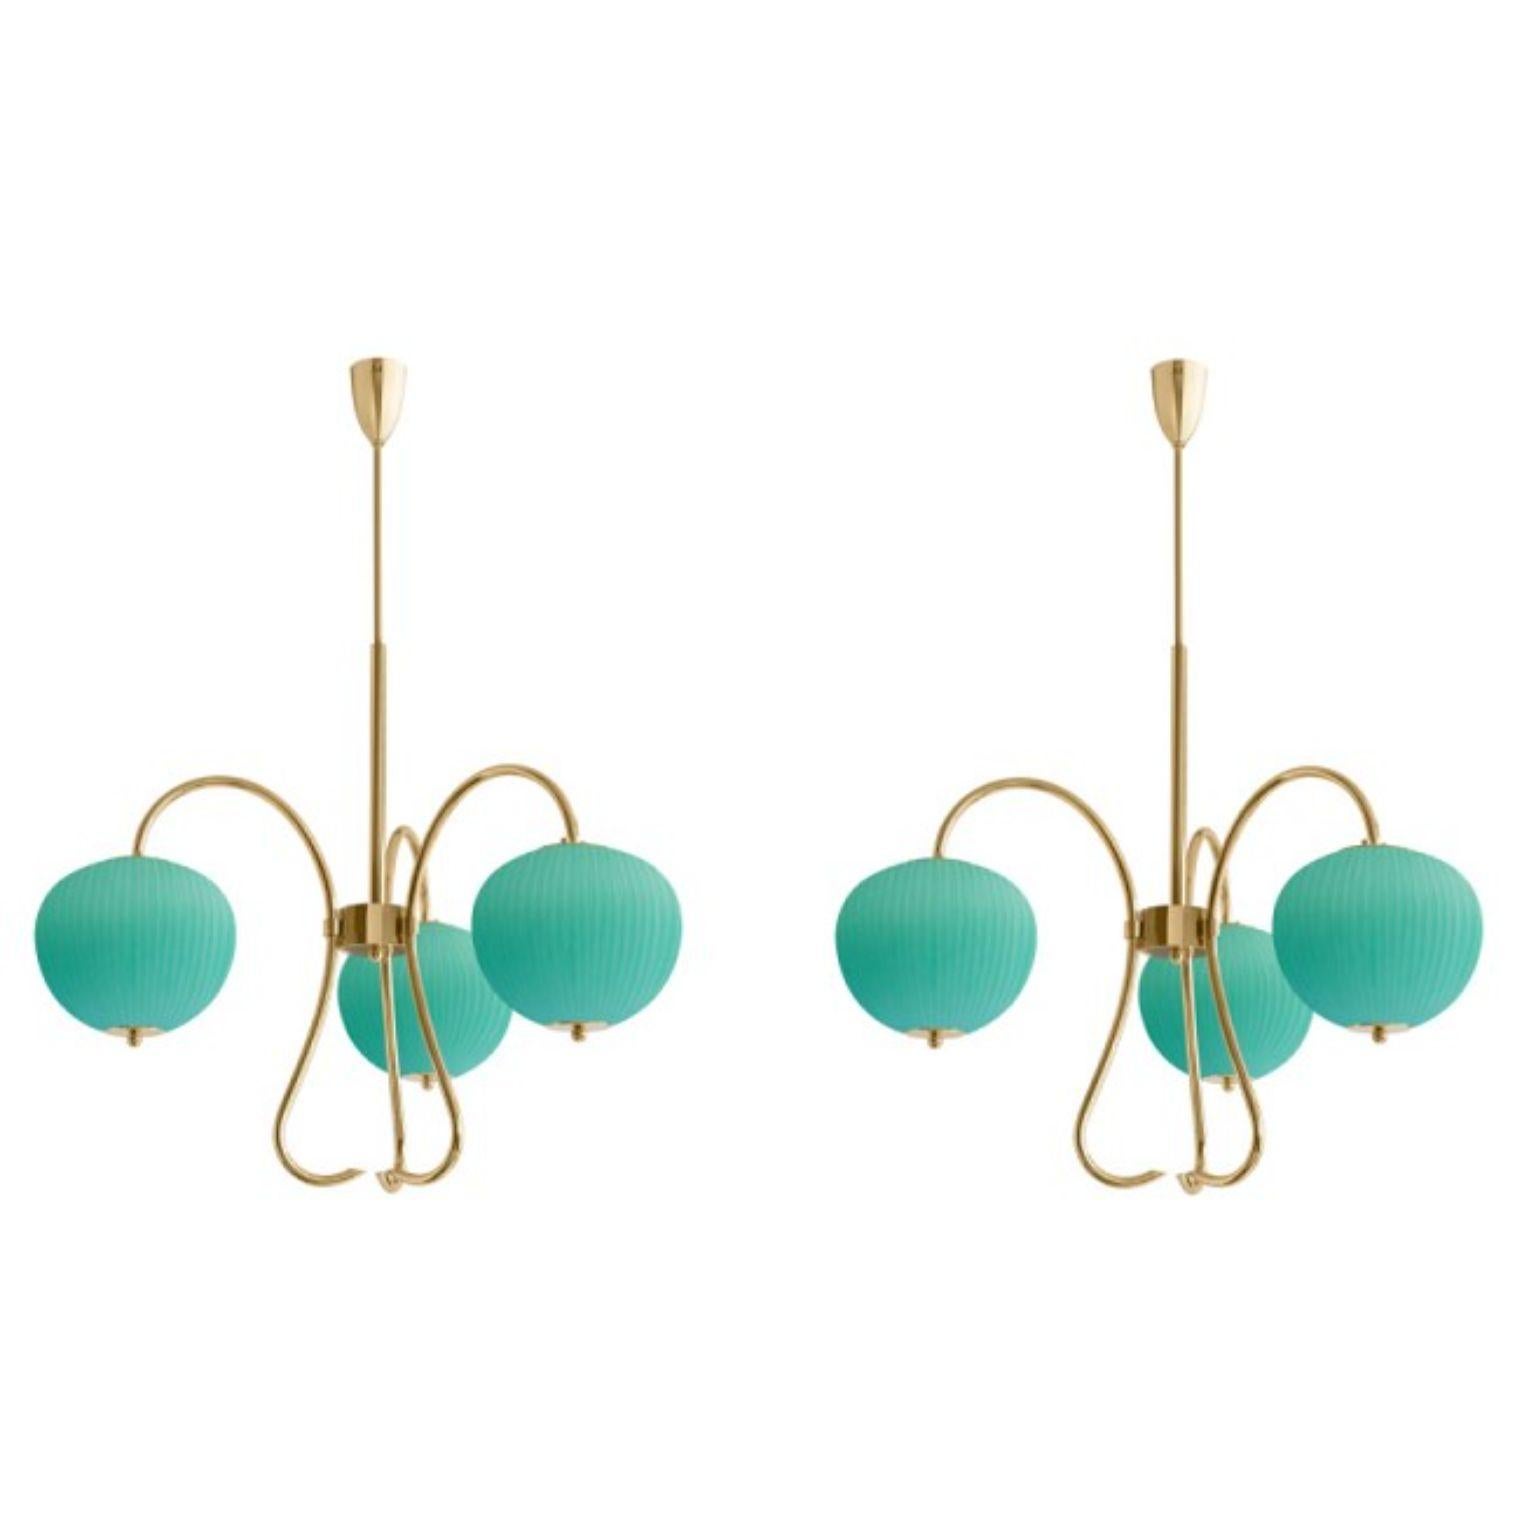 Triple chandelier China 03 by Magic Circus Editions
Dimensions: H 120 x W 81.5 x D 26.2 cm
Materials: brass, mouth blown glass sculpted with a diamond saw
Colour: jade green

Available finishes: Brass, nickel
Available colours: enamel soft